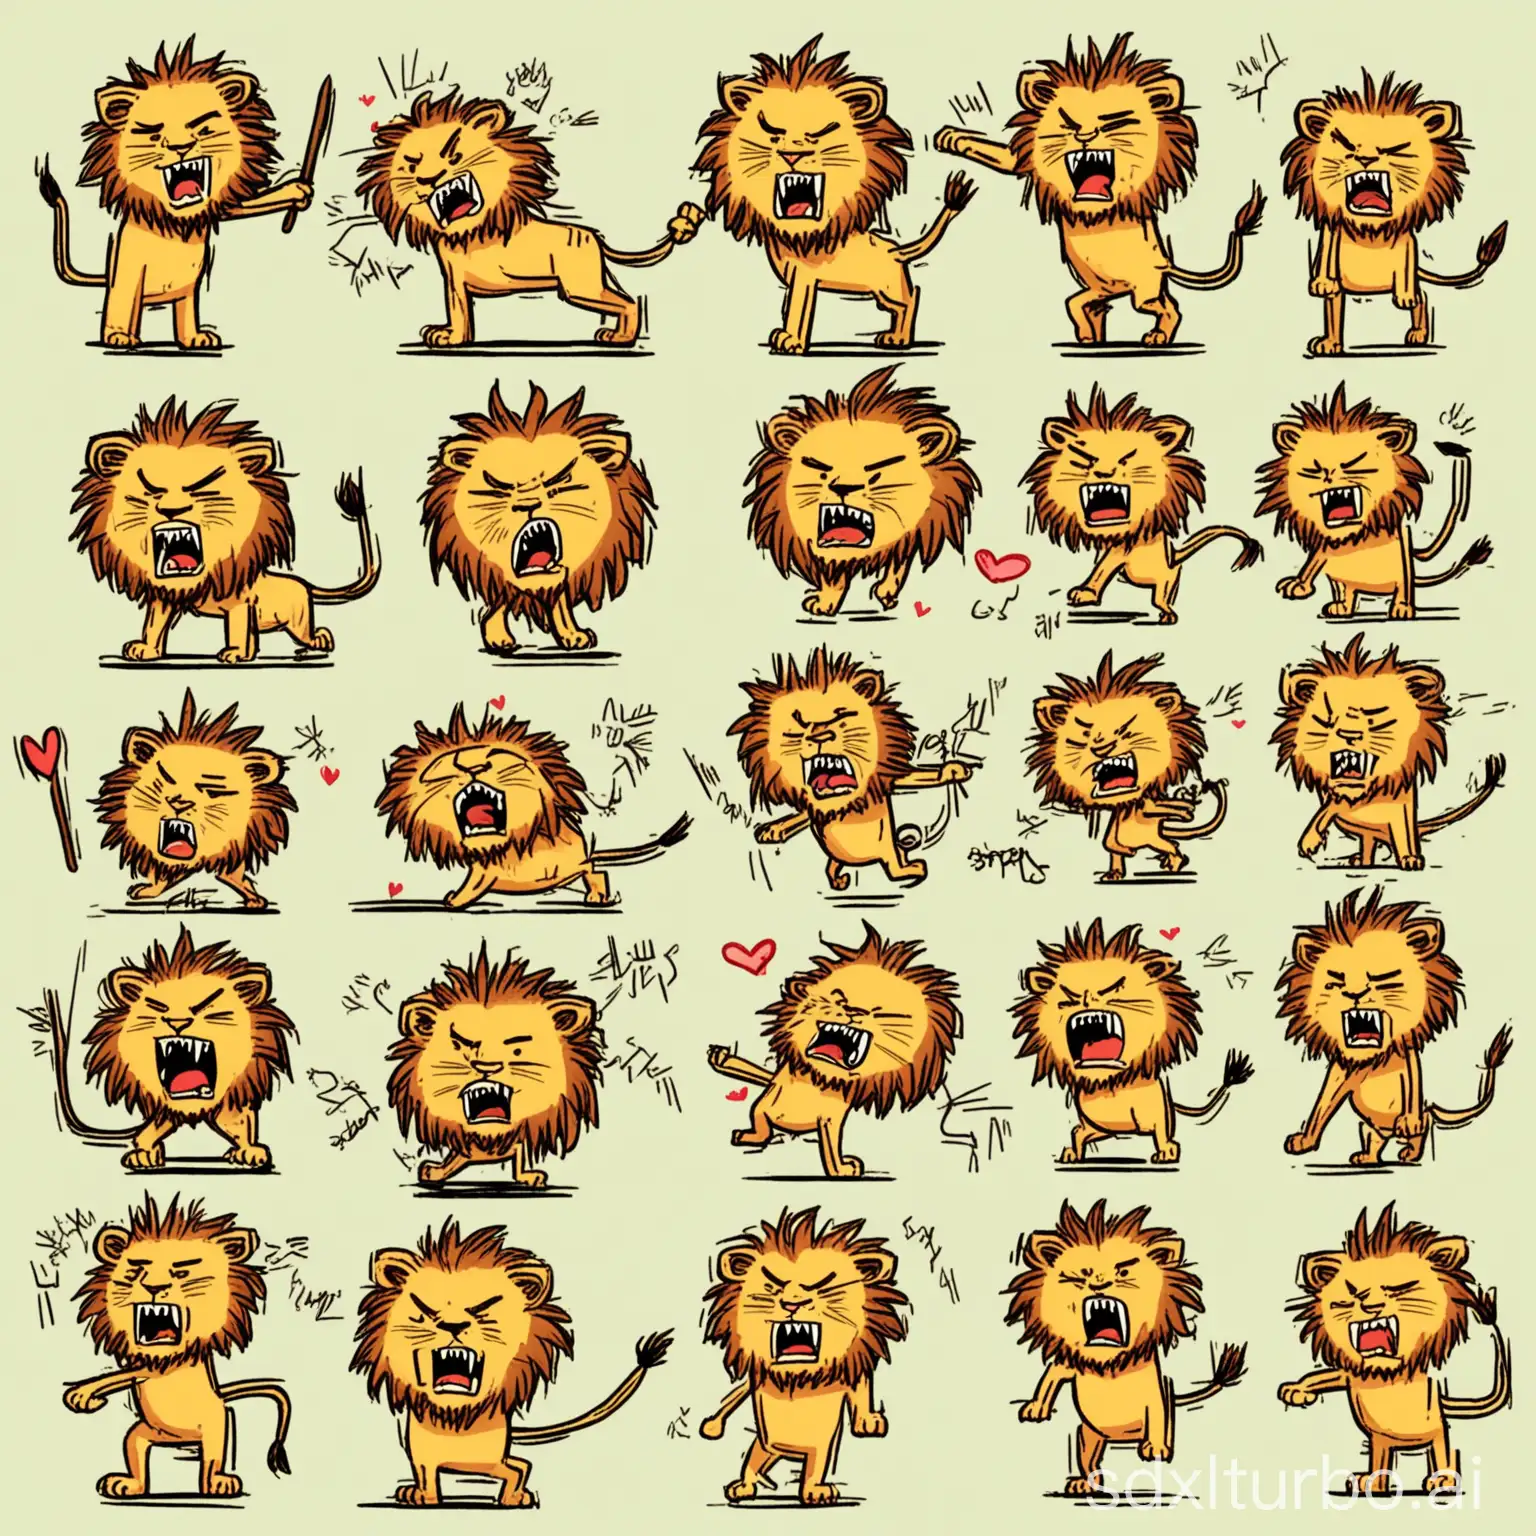 The various expressions of the lion,angry,happy,angry,coquettish expressing love, etc, with bold comic lines, cute style, stick figure style, dynamic pose, White background, f/64 group, related Personality, Old Meme Kernel, Chalk –ar 3:4 –s 250 –niji 5 –s 400 –style cute